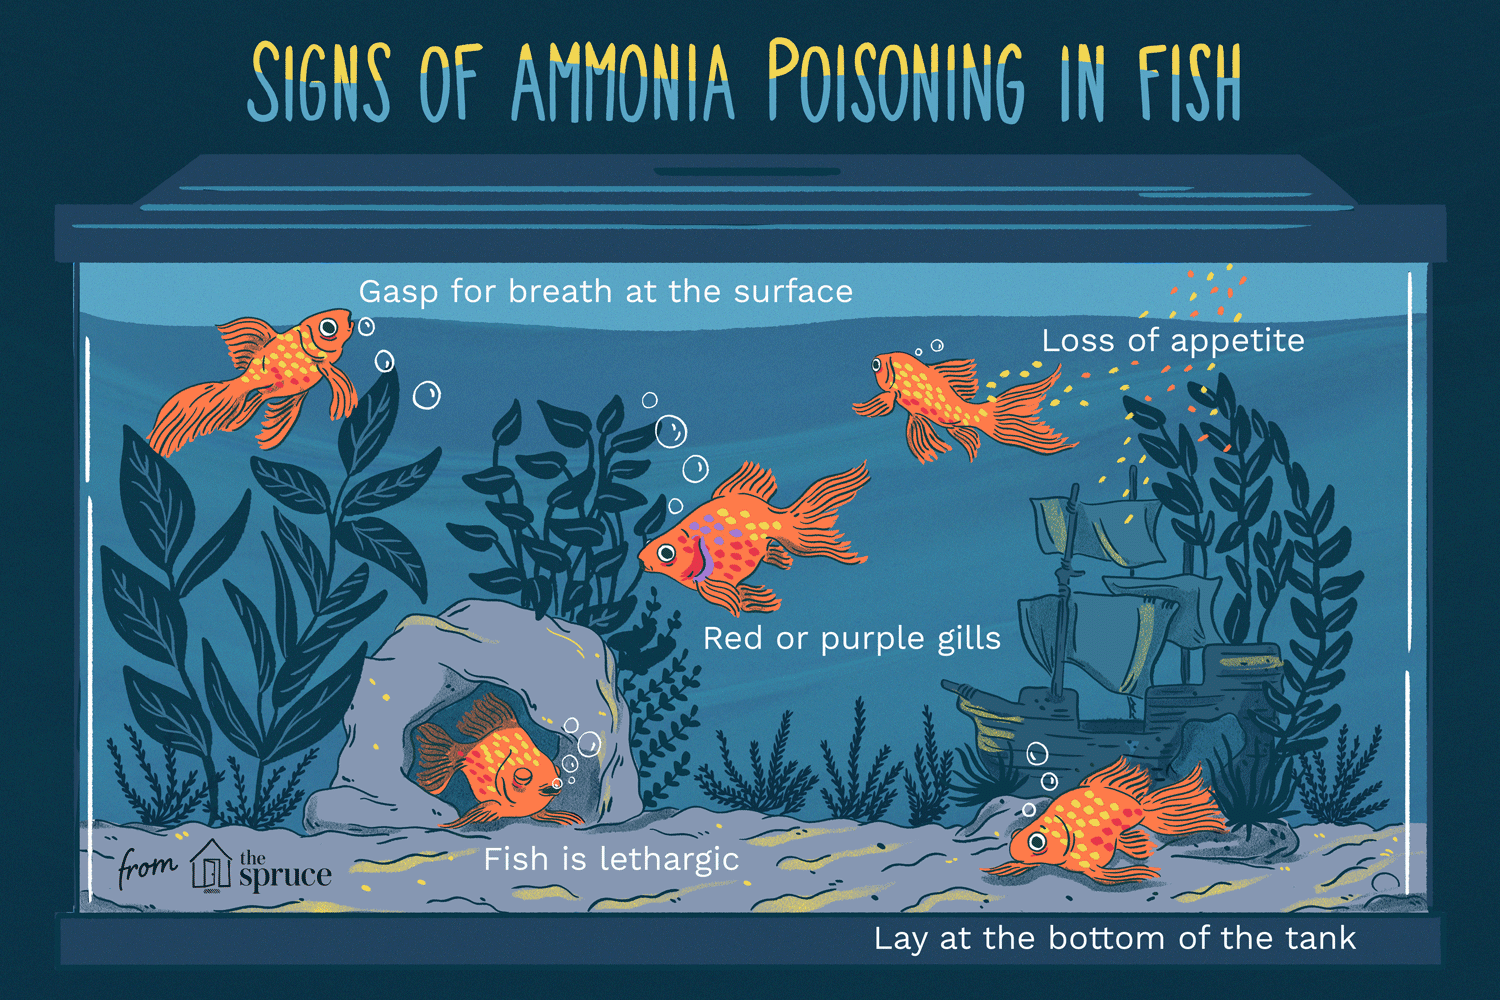 GIF of an illustration of the signs of ammonia poisoning in fish